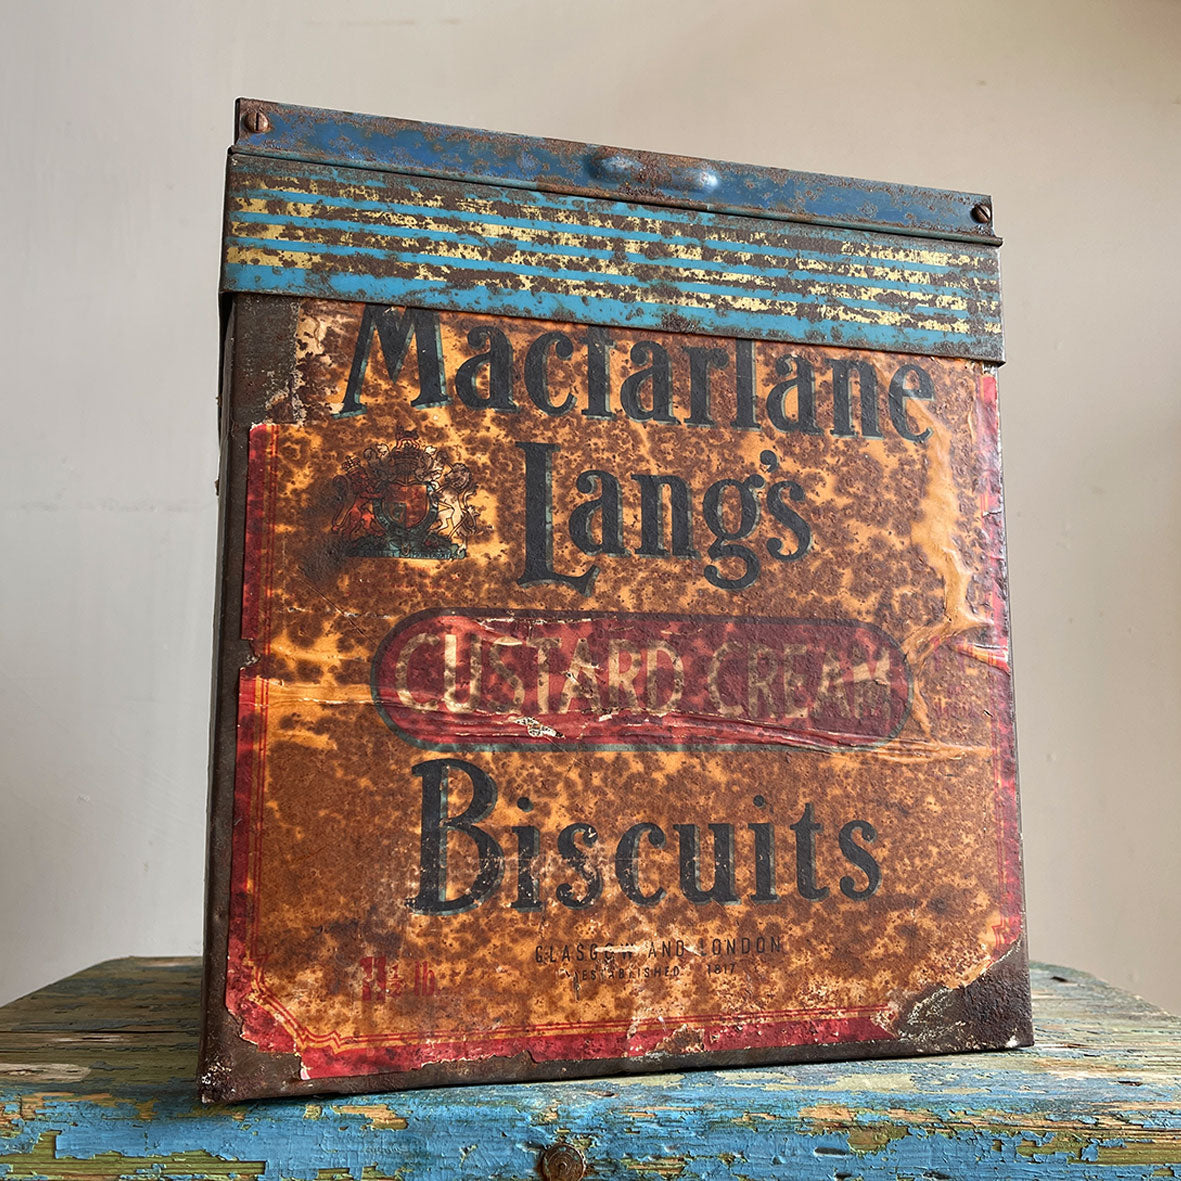 A Macfarlane & Lang large square Custard Creams Biscuit Tin with glass top display lid. This tin would have been used in a shop to store and display biscuits for sale. Fantastic aged patina to the front graphics. - SHOP NOW - www.intovintage.co.uk